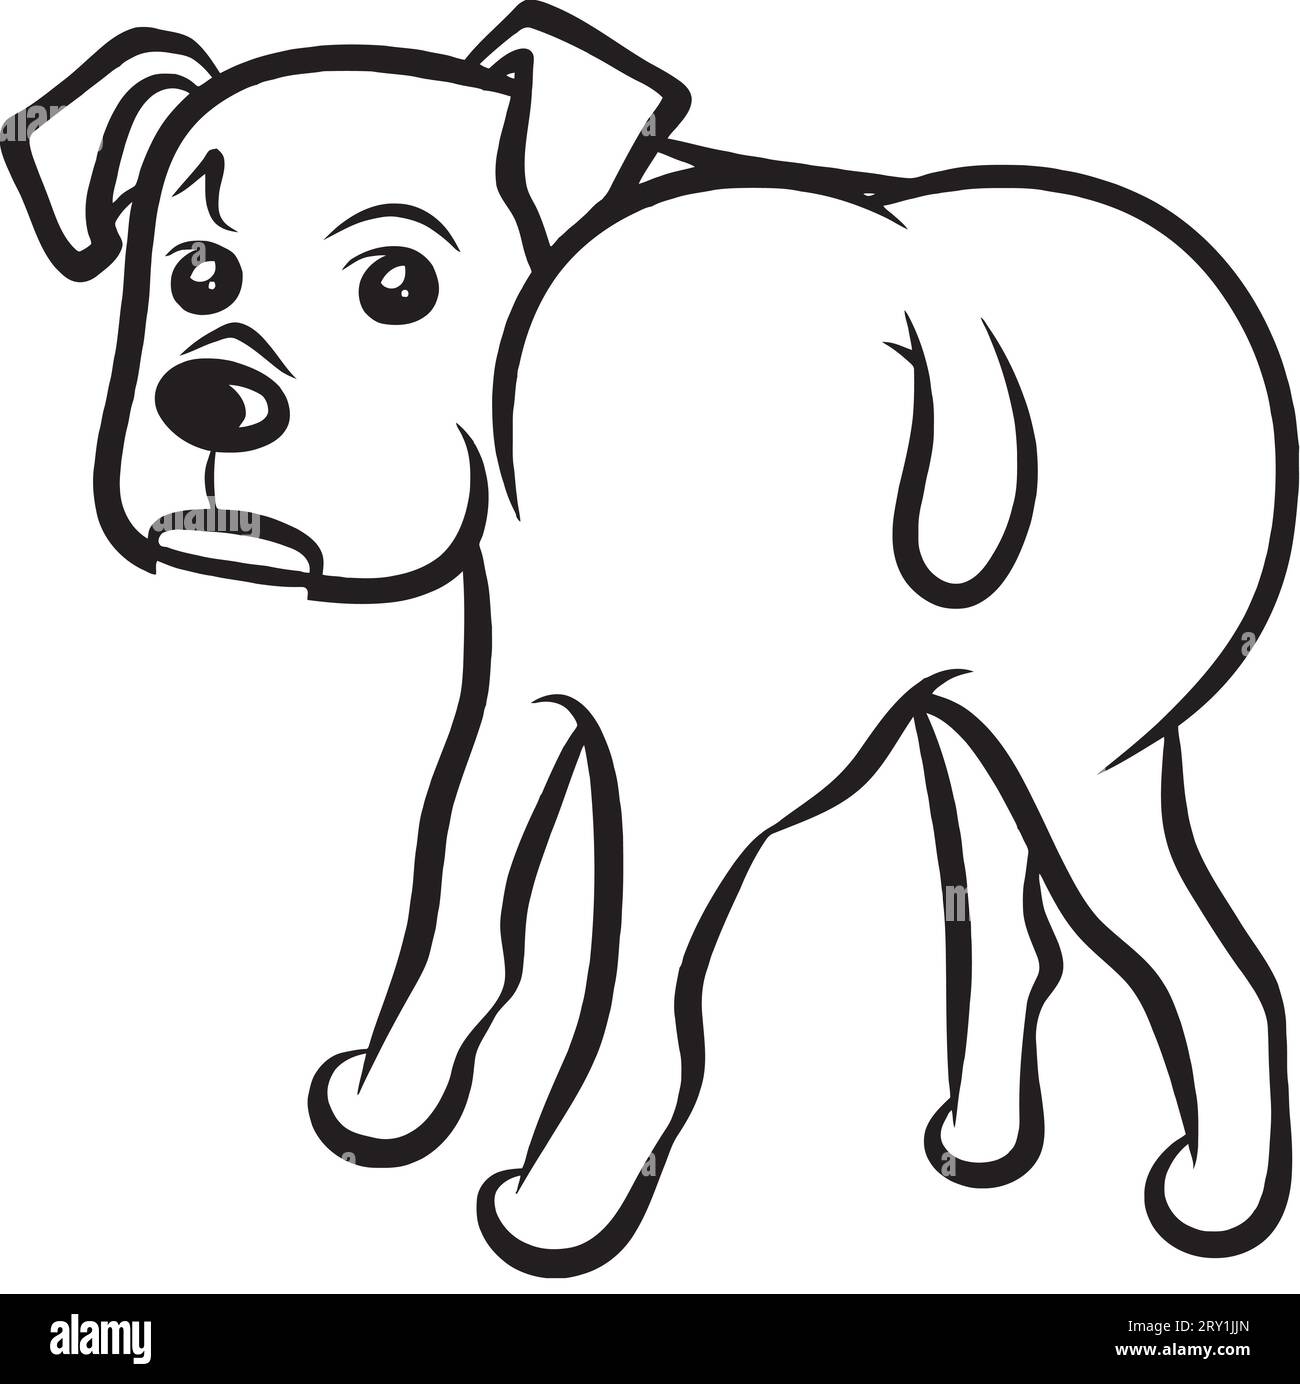 Easy Dog Drawing for Kids Coloring Page